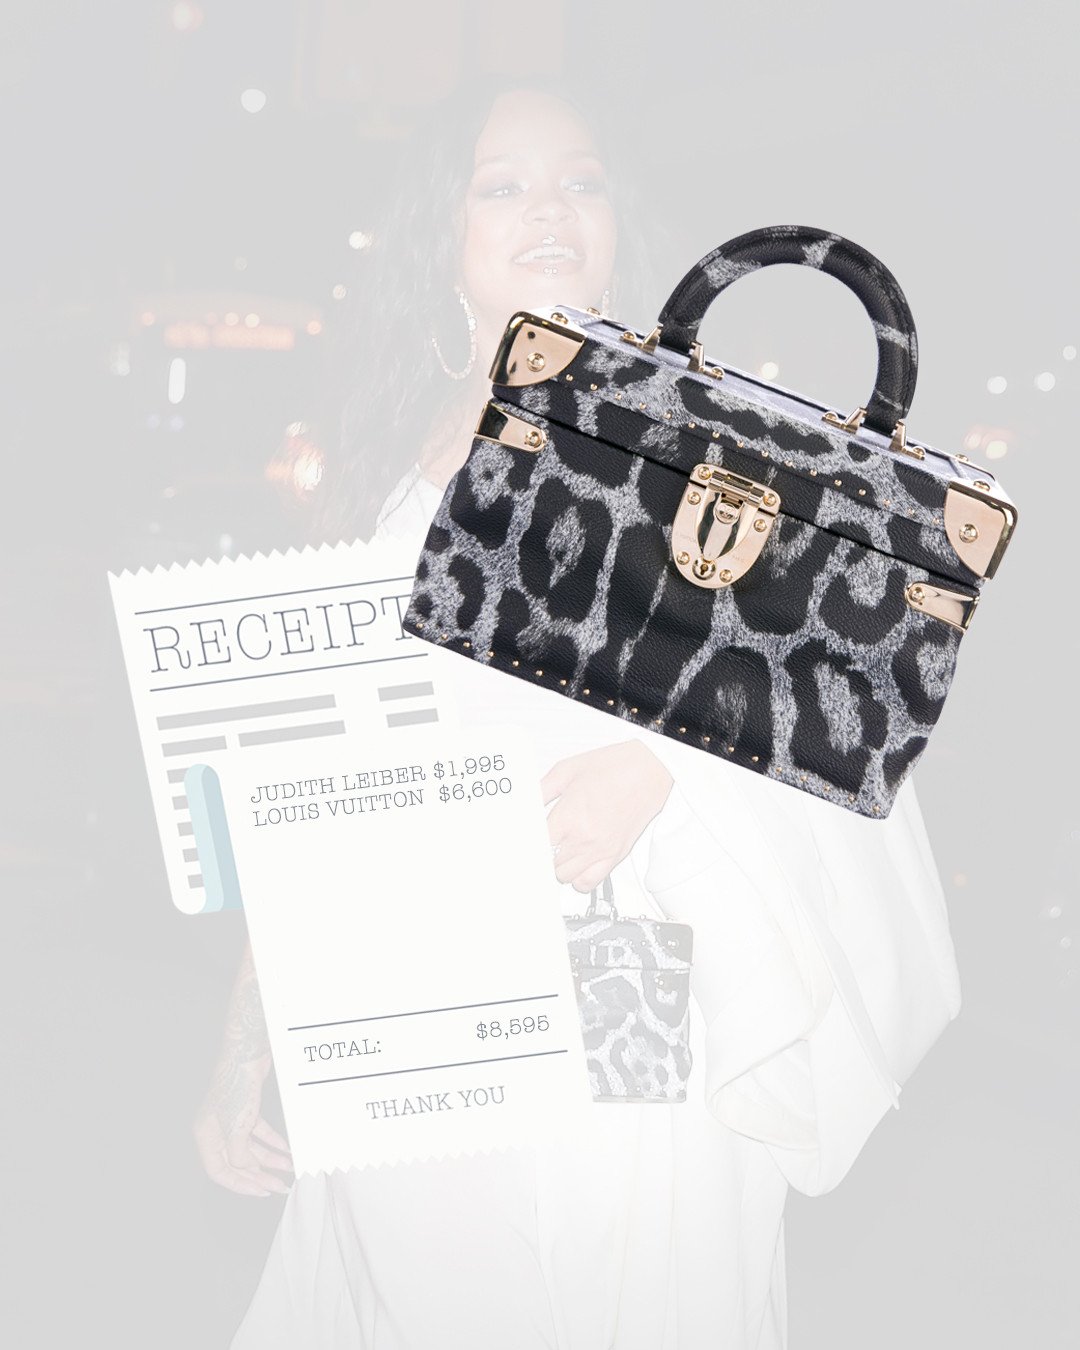 Rihanna Strikes Again With Another Novelty Louis Vuitton Bag